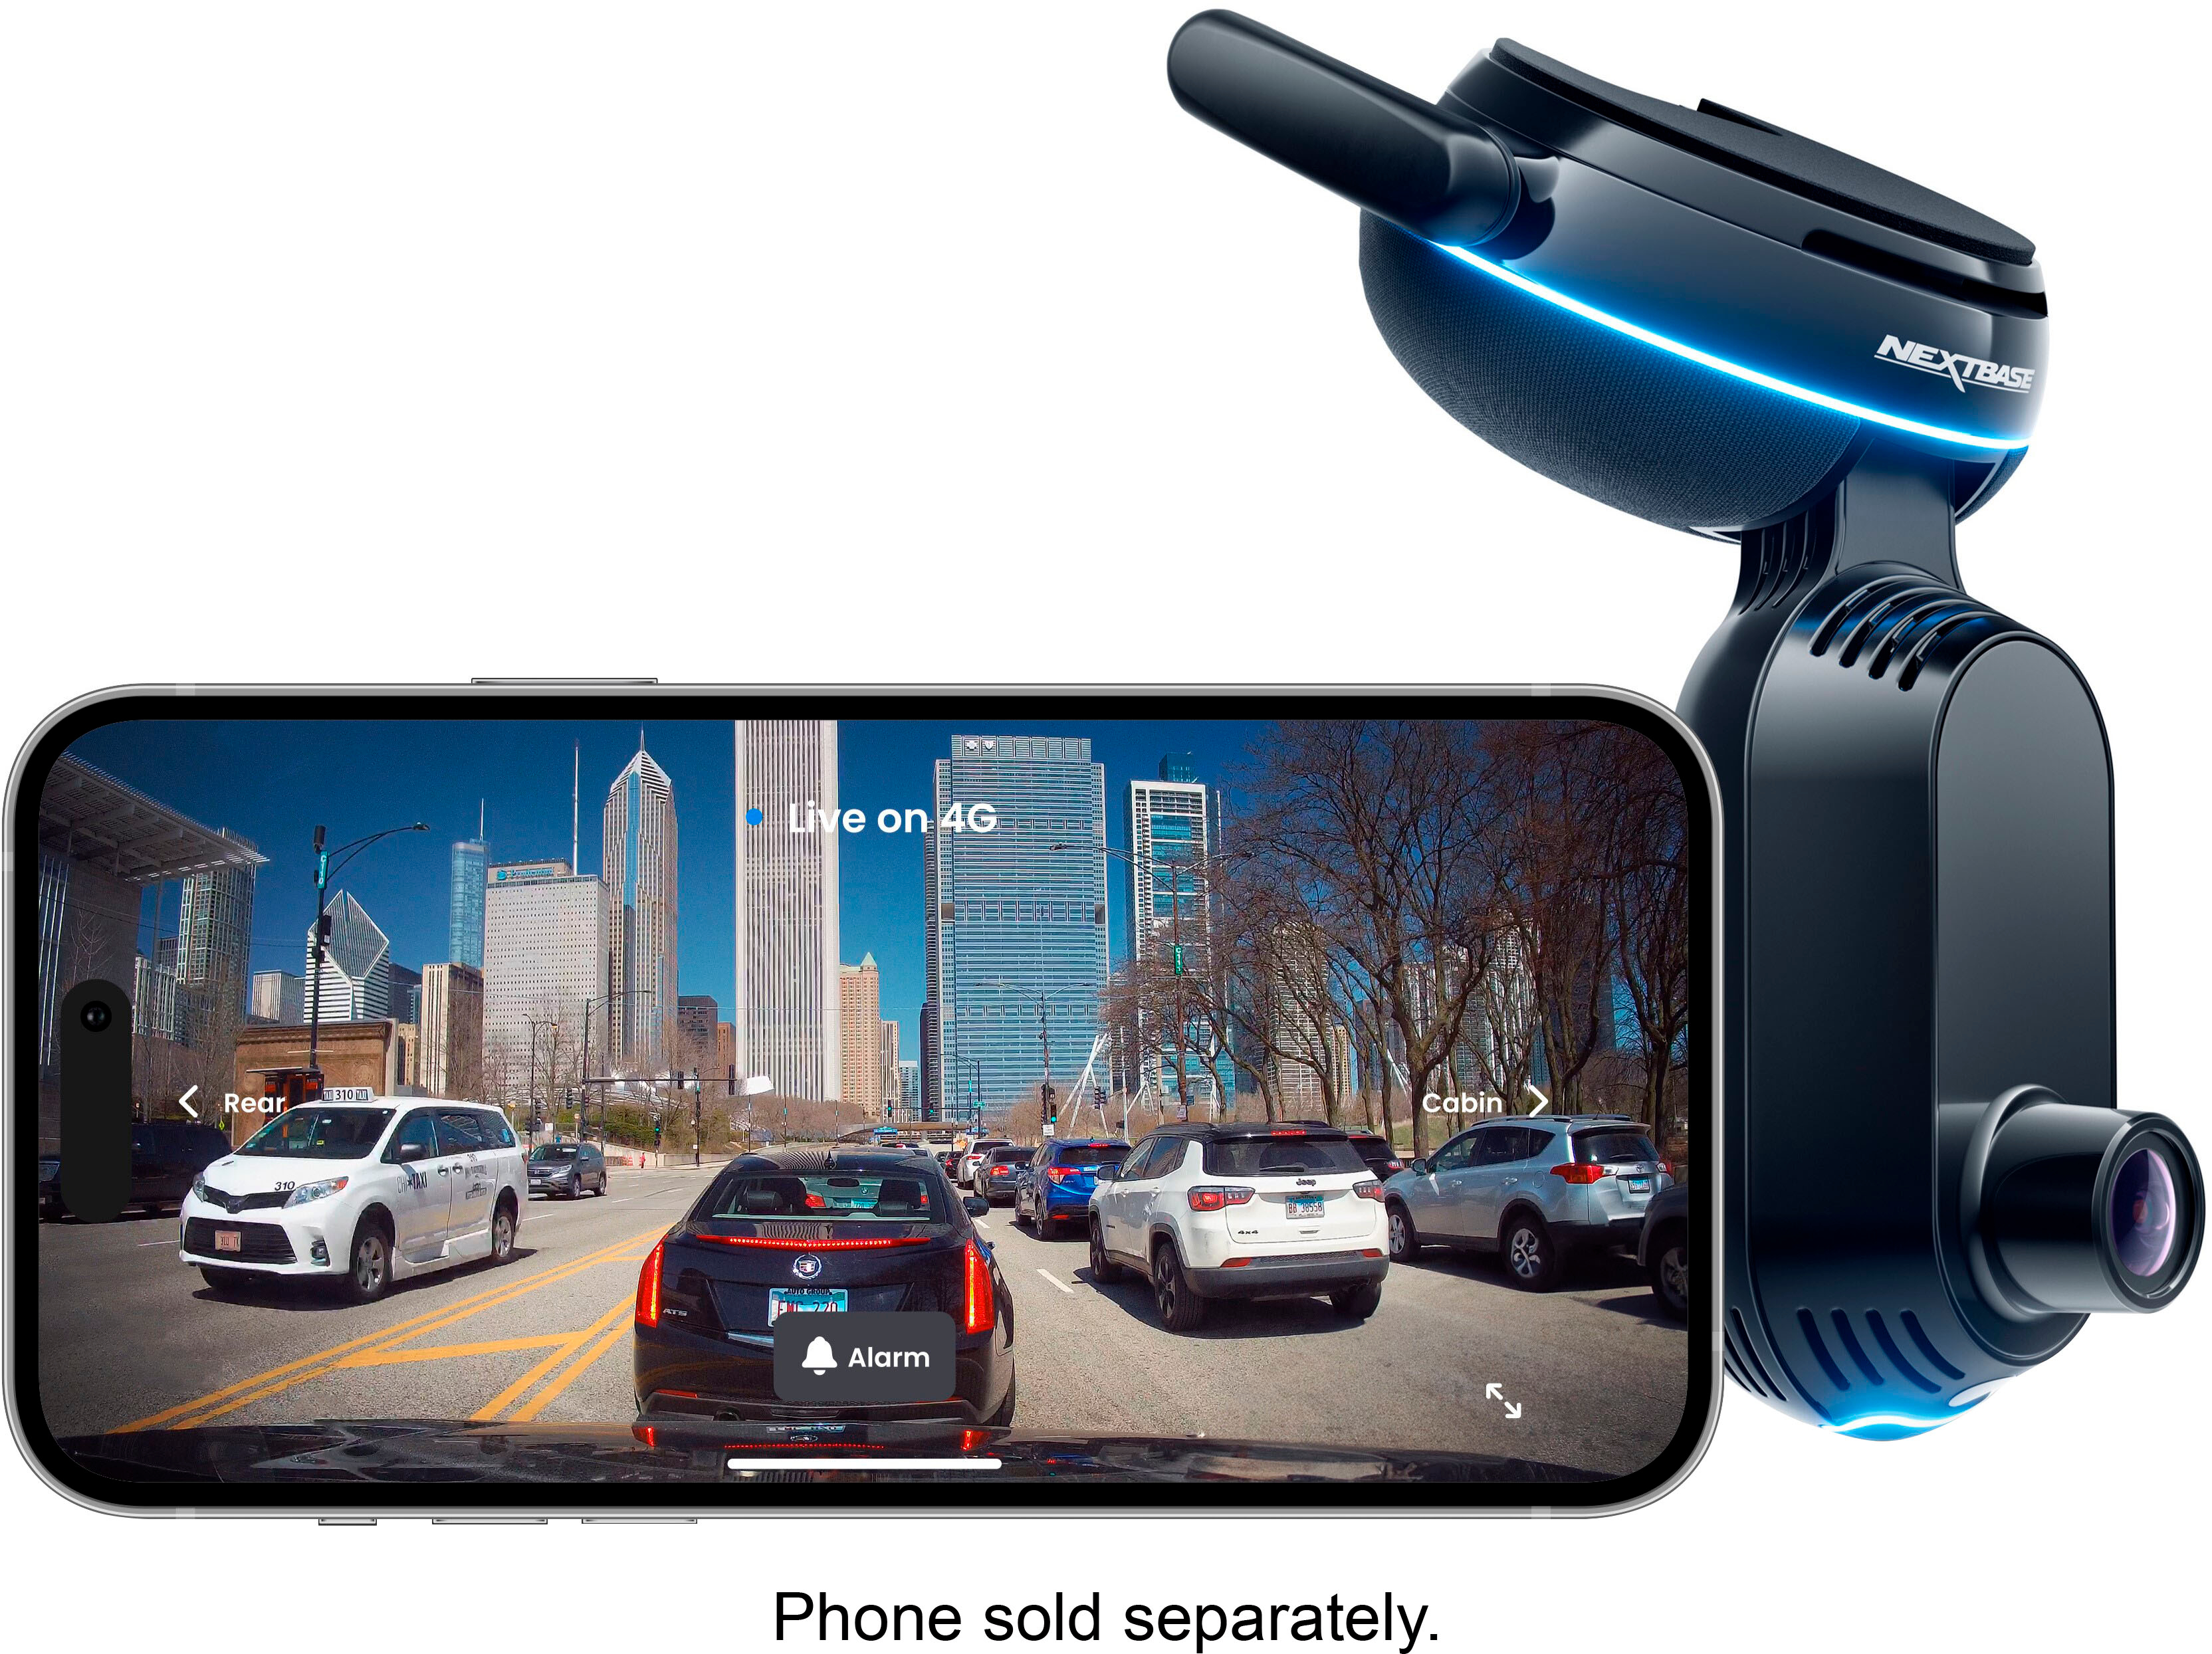 The Nextbase iQ is a Google Nest-style dash cam with clever AI smarts